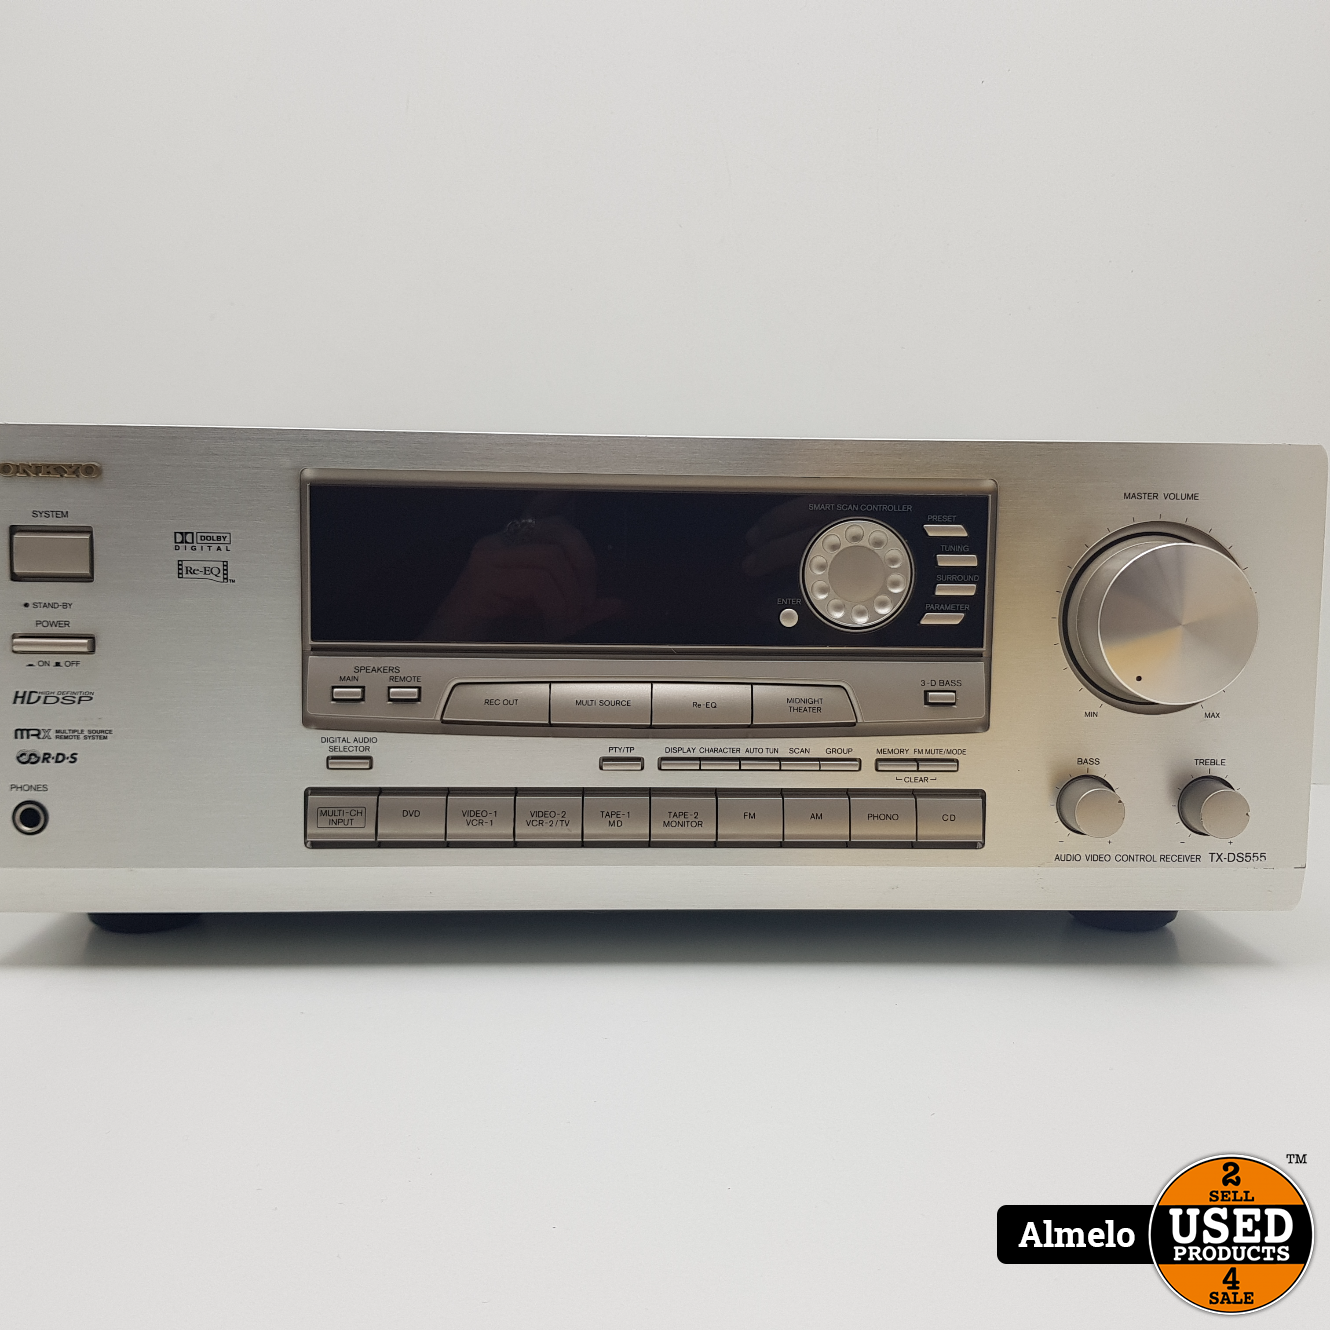 Onkyo TX - DS555 - AV Receiver Used Products Almelo